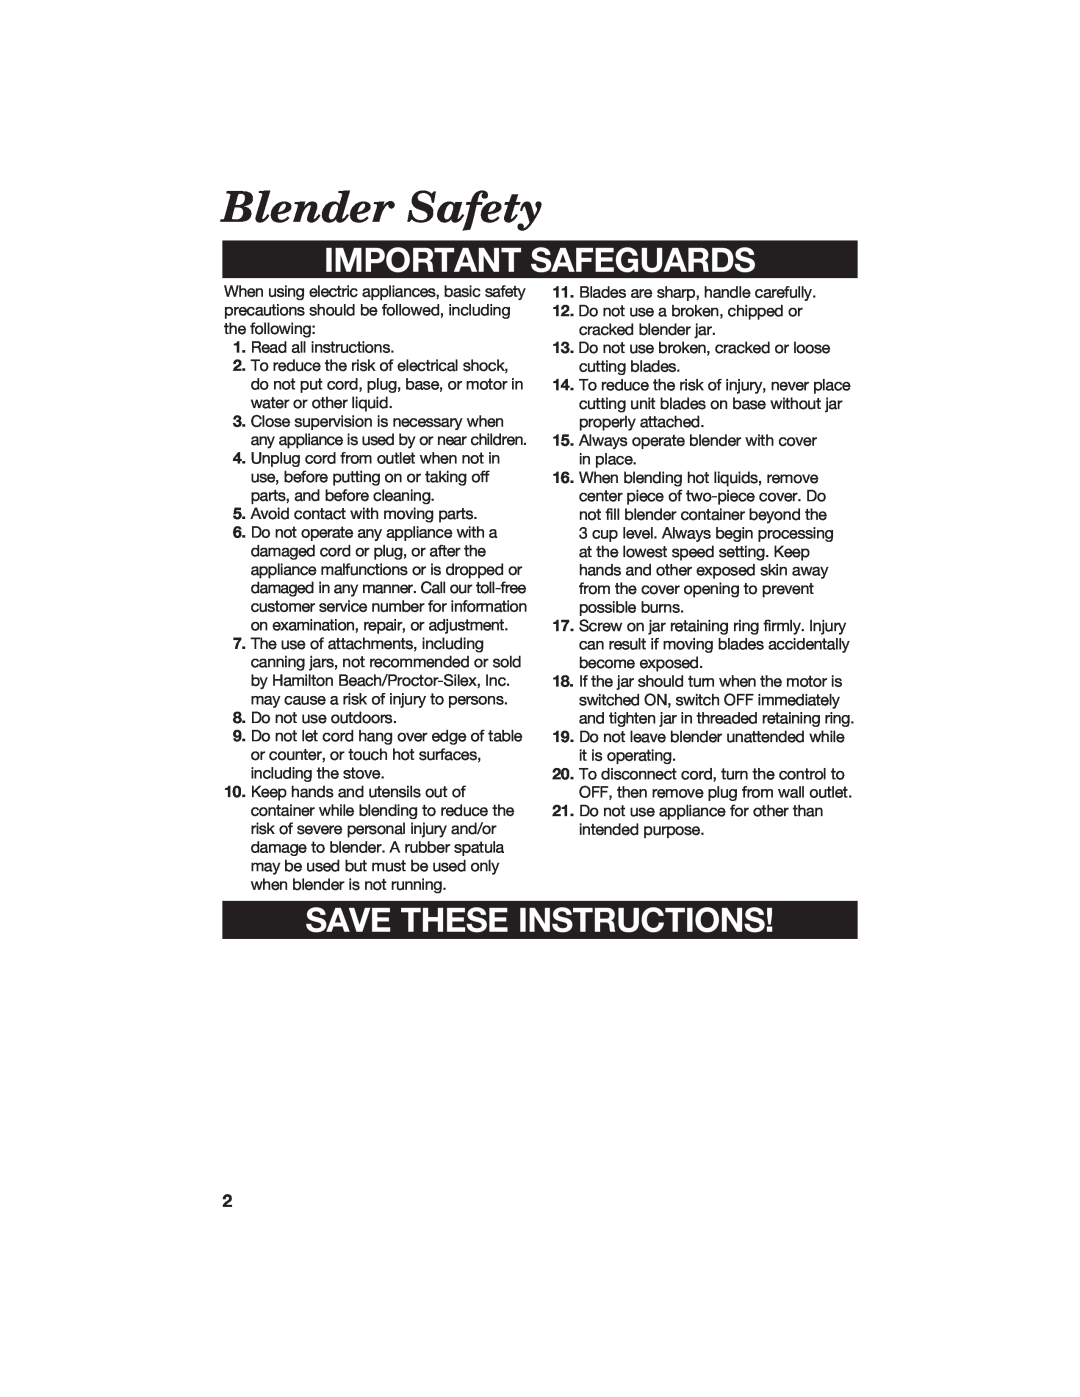 Hamilton Beach 840071000 manual Blender Safety, Important Safeguards, Save These Instructions 